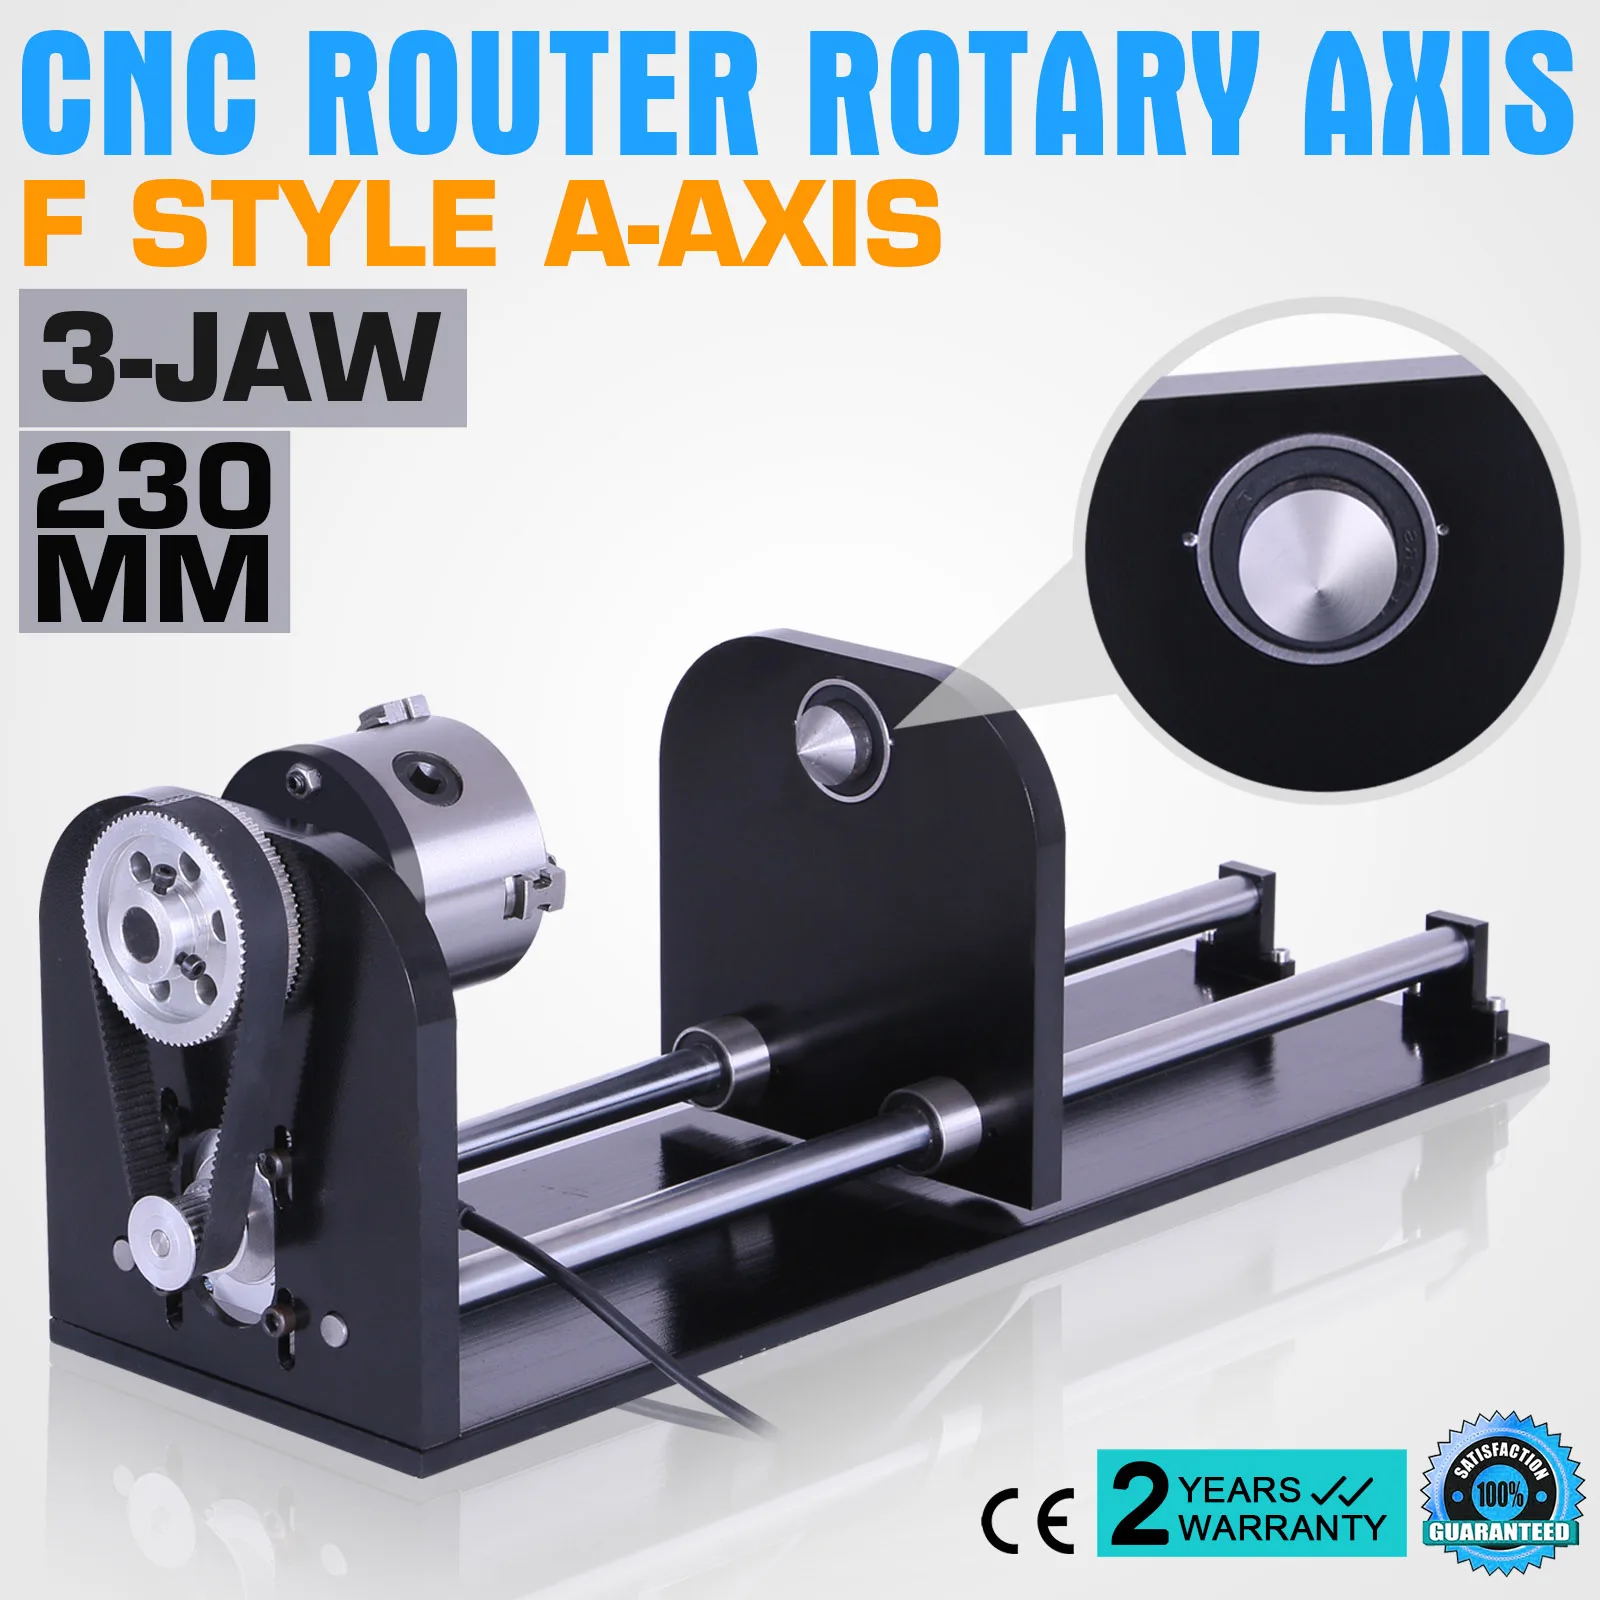 ROTARY AXIS WITH 80 MM 3-JAW 510 MM TRACK CNC ROUTER ACCESSORY F STYLE A-AXIS 